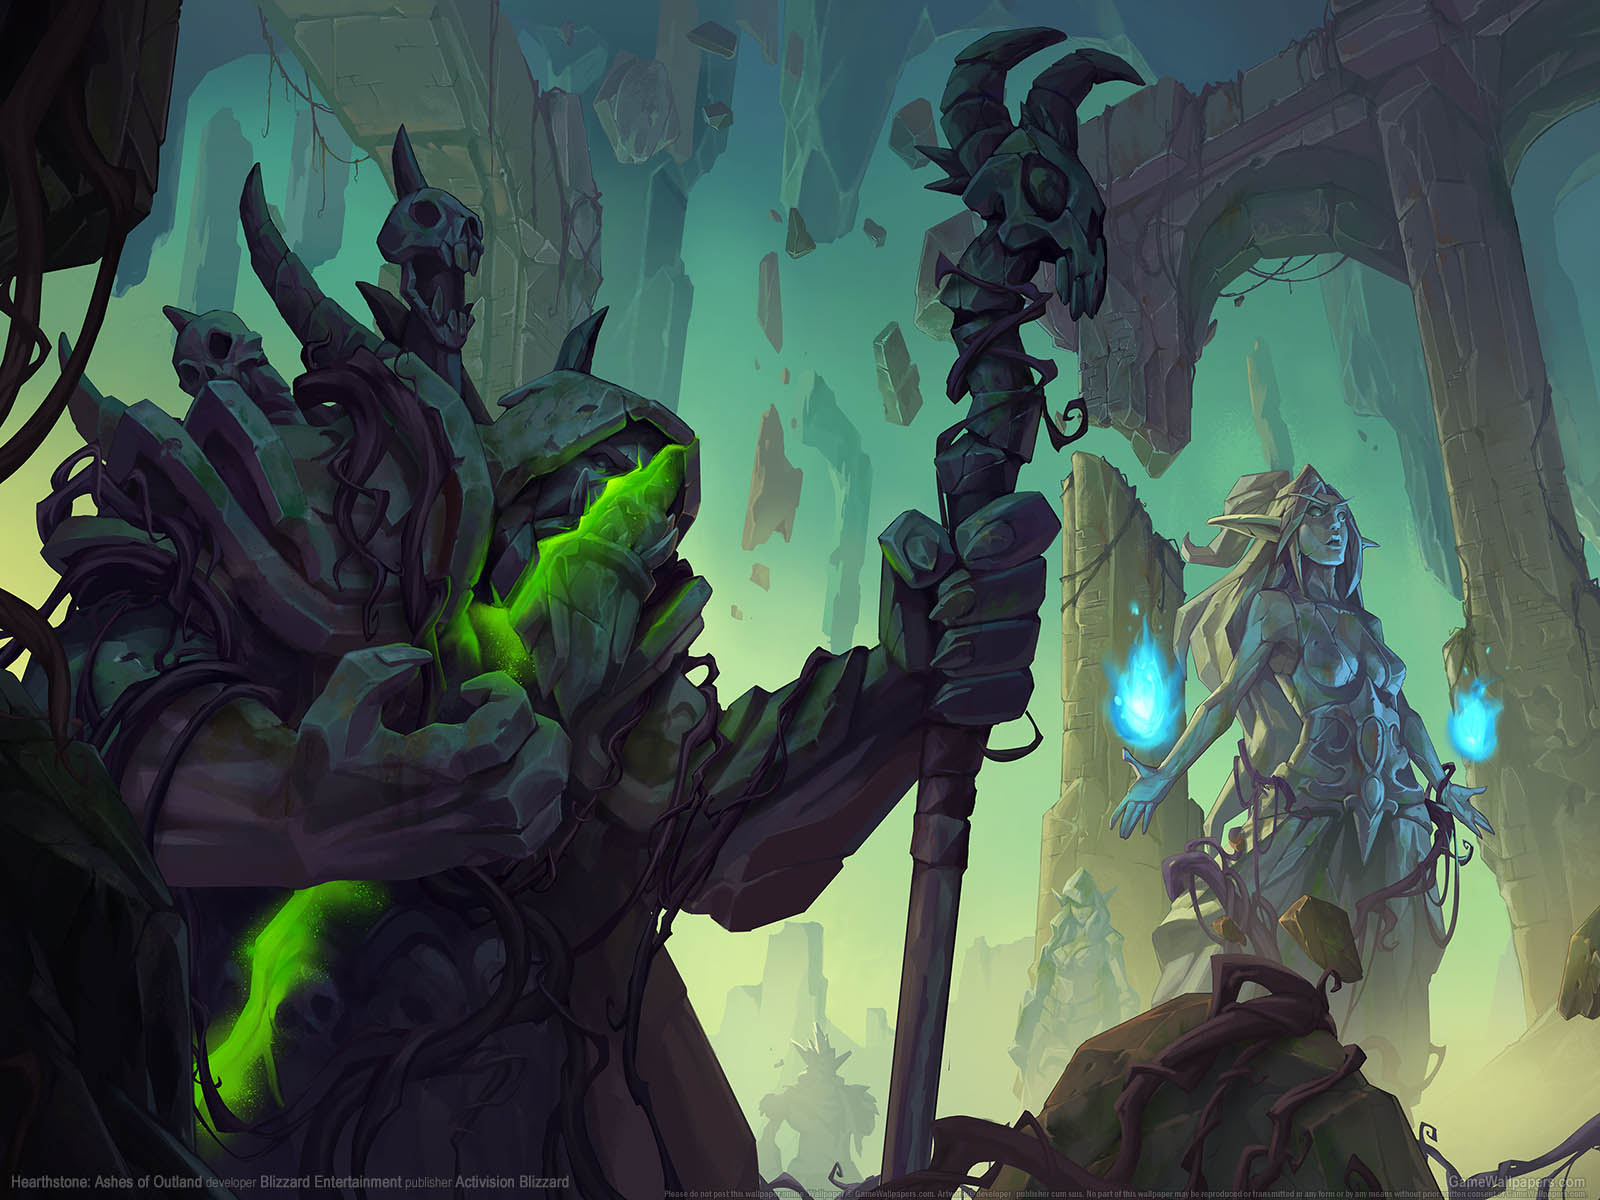 Hearthstone%253A Ashes of Outland wallpaper 01 1600x1200